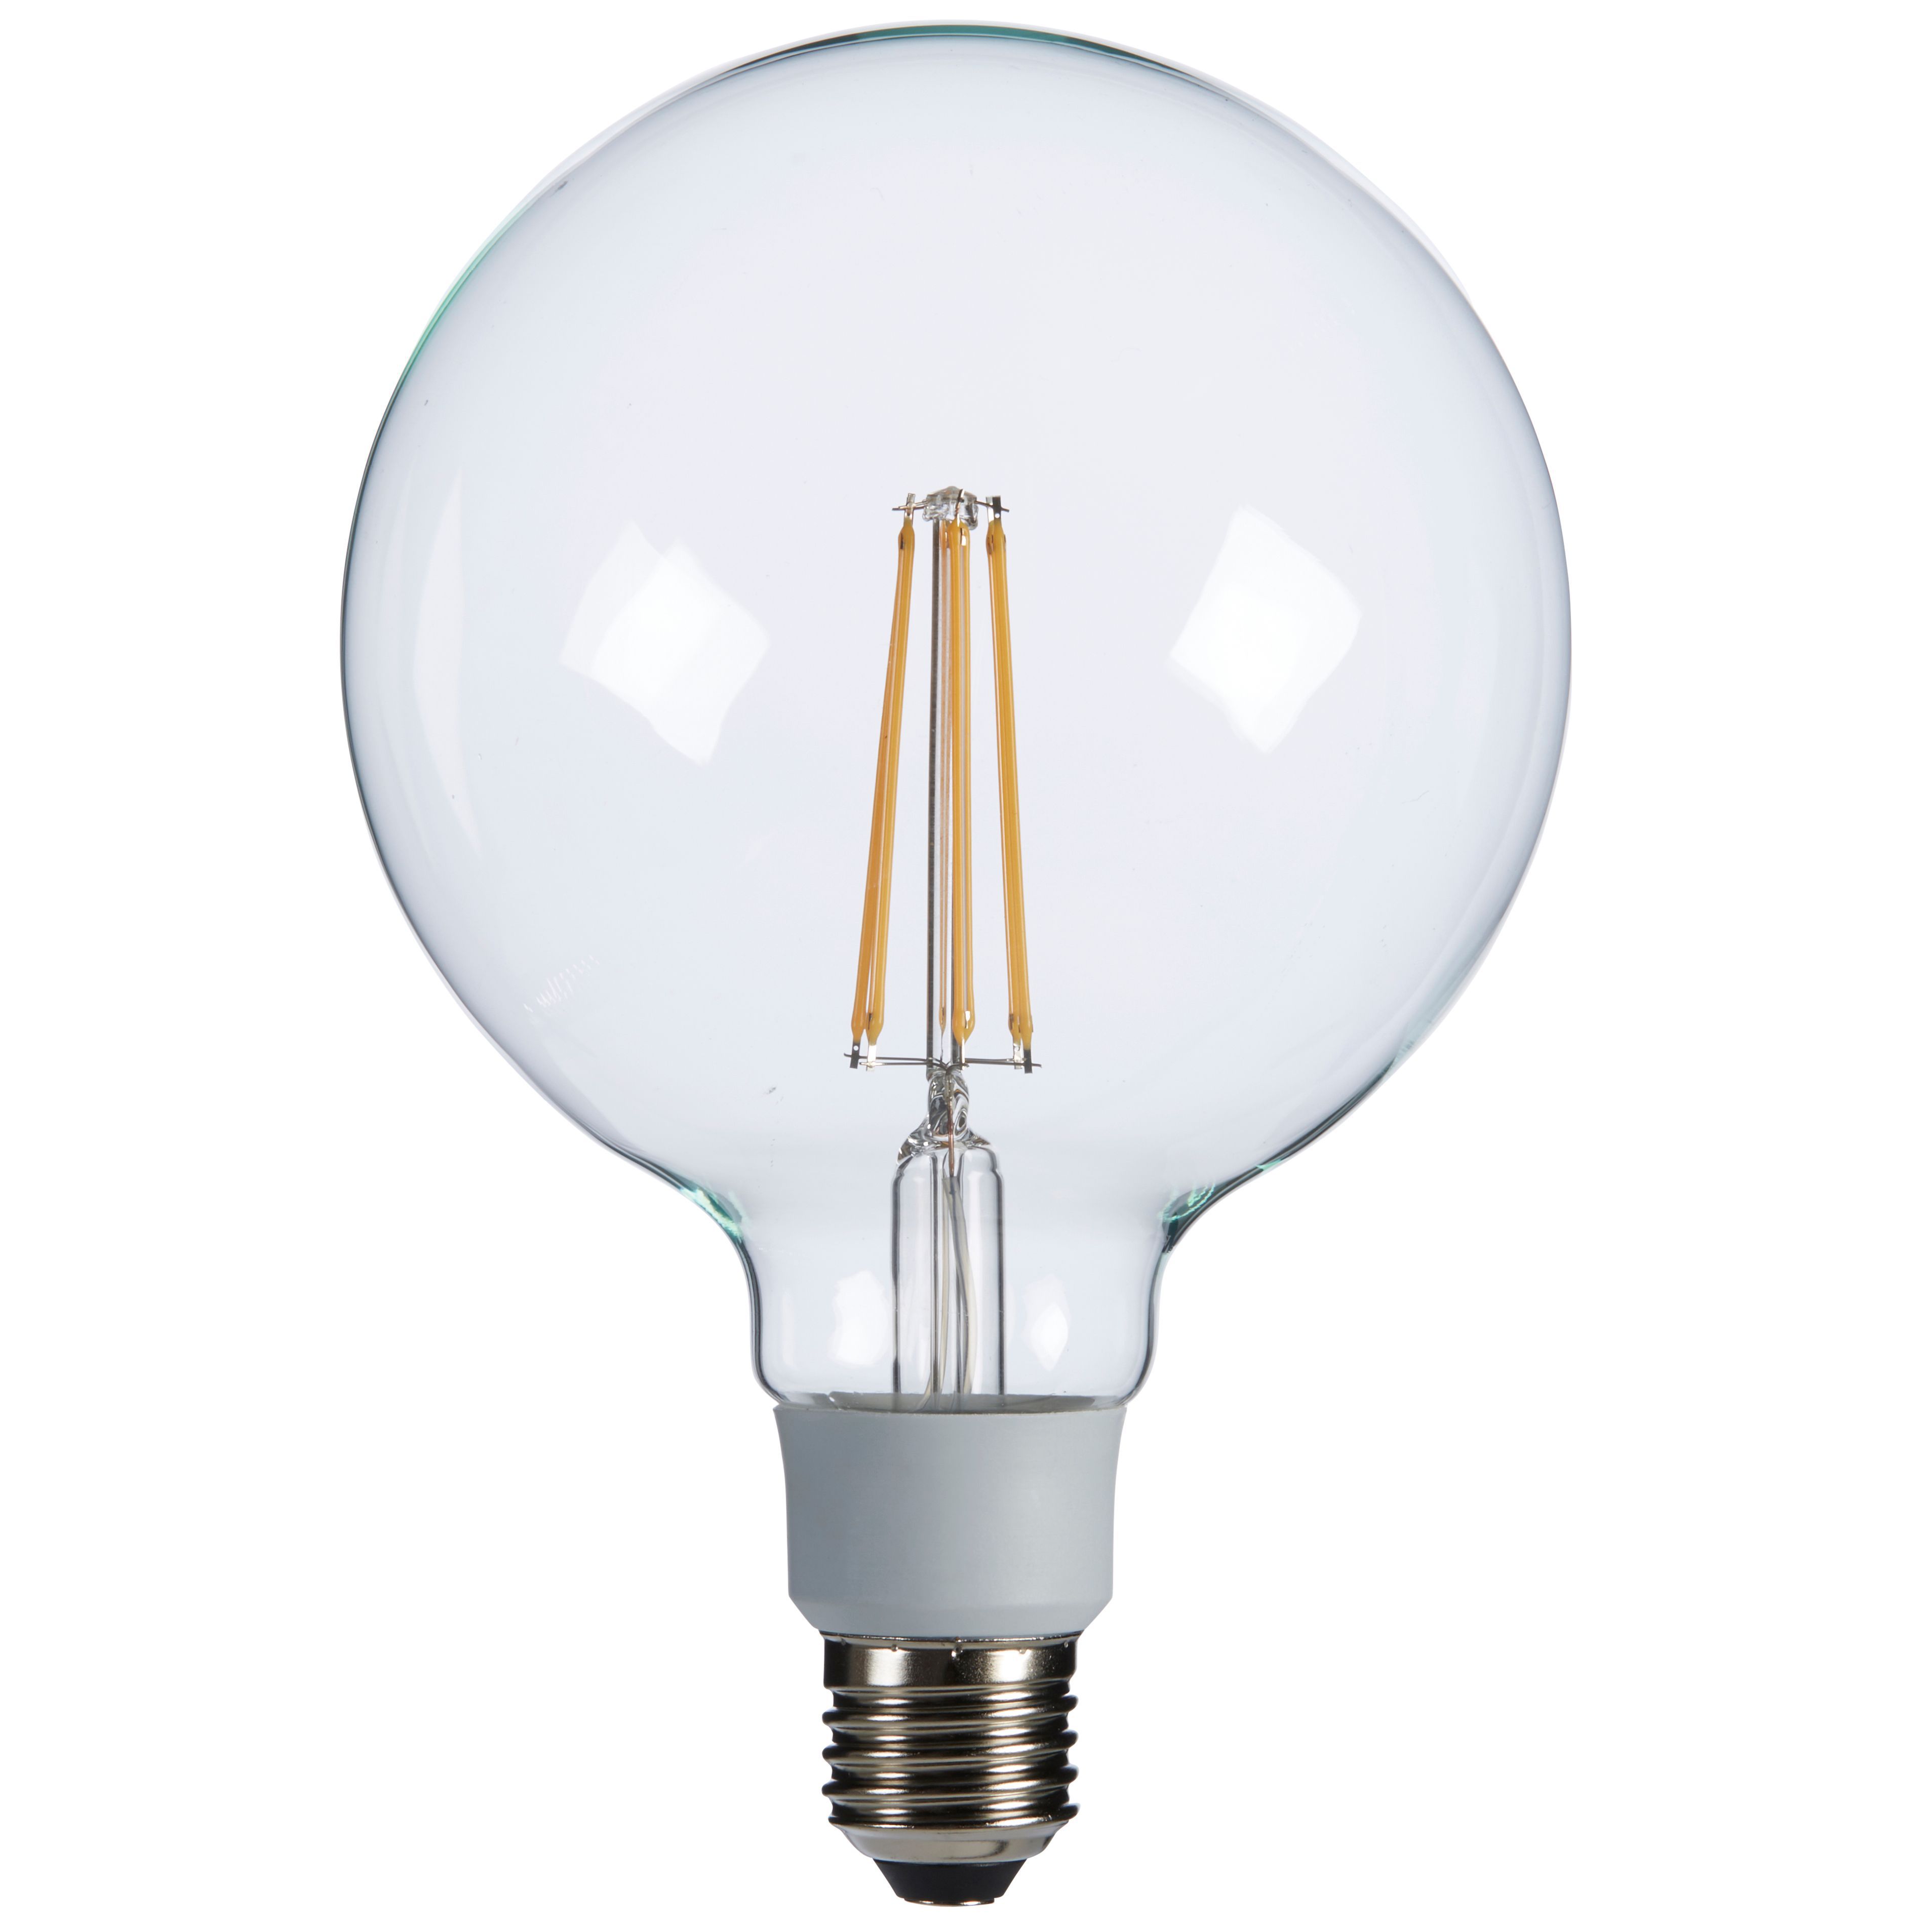 Diall E27 1521lm GLS Warm white LED Dimmable Light bulb